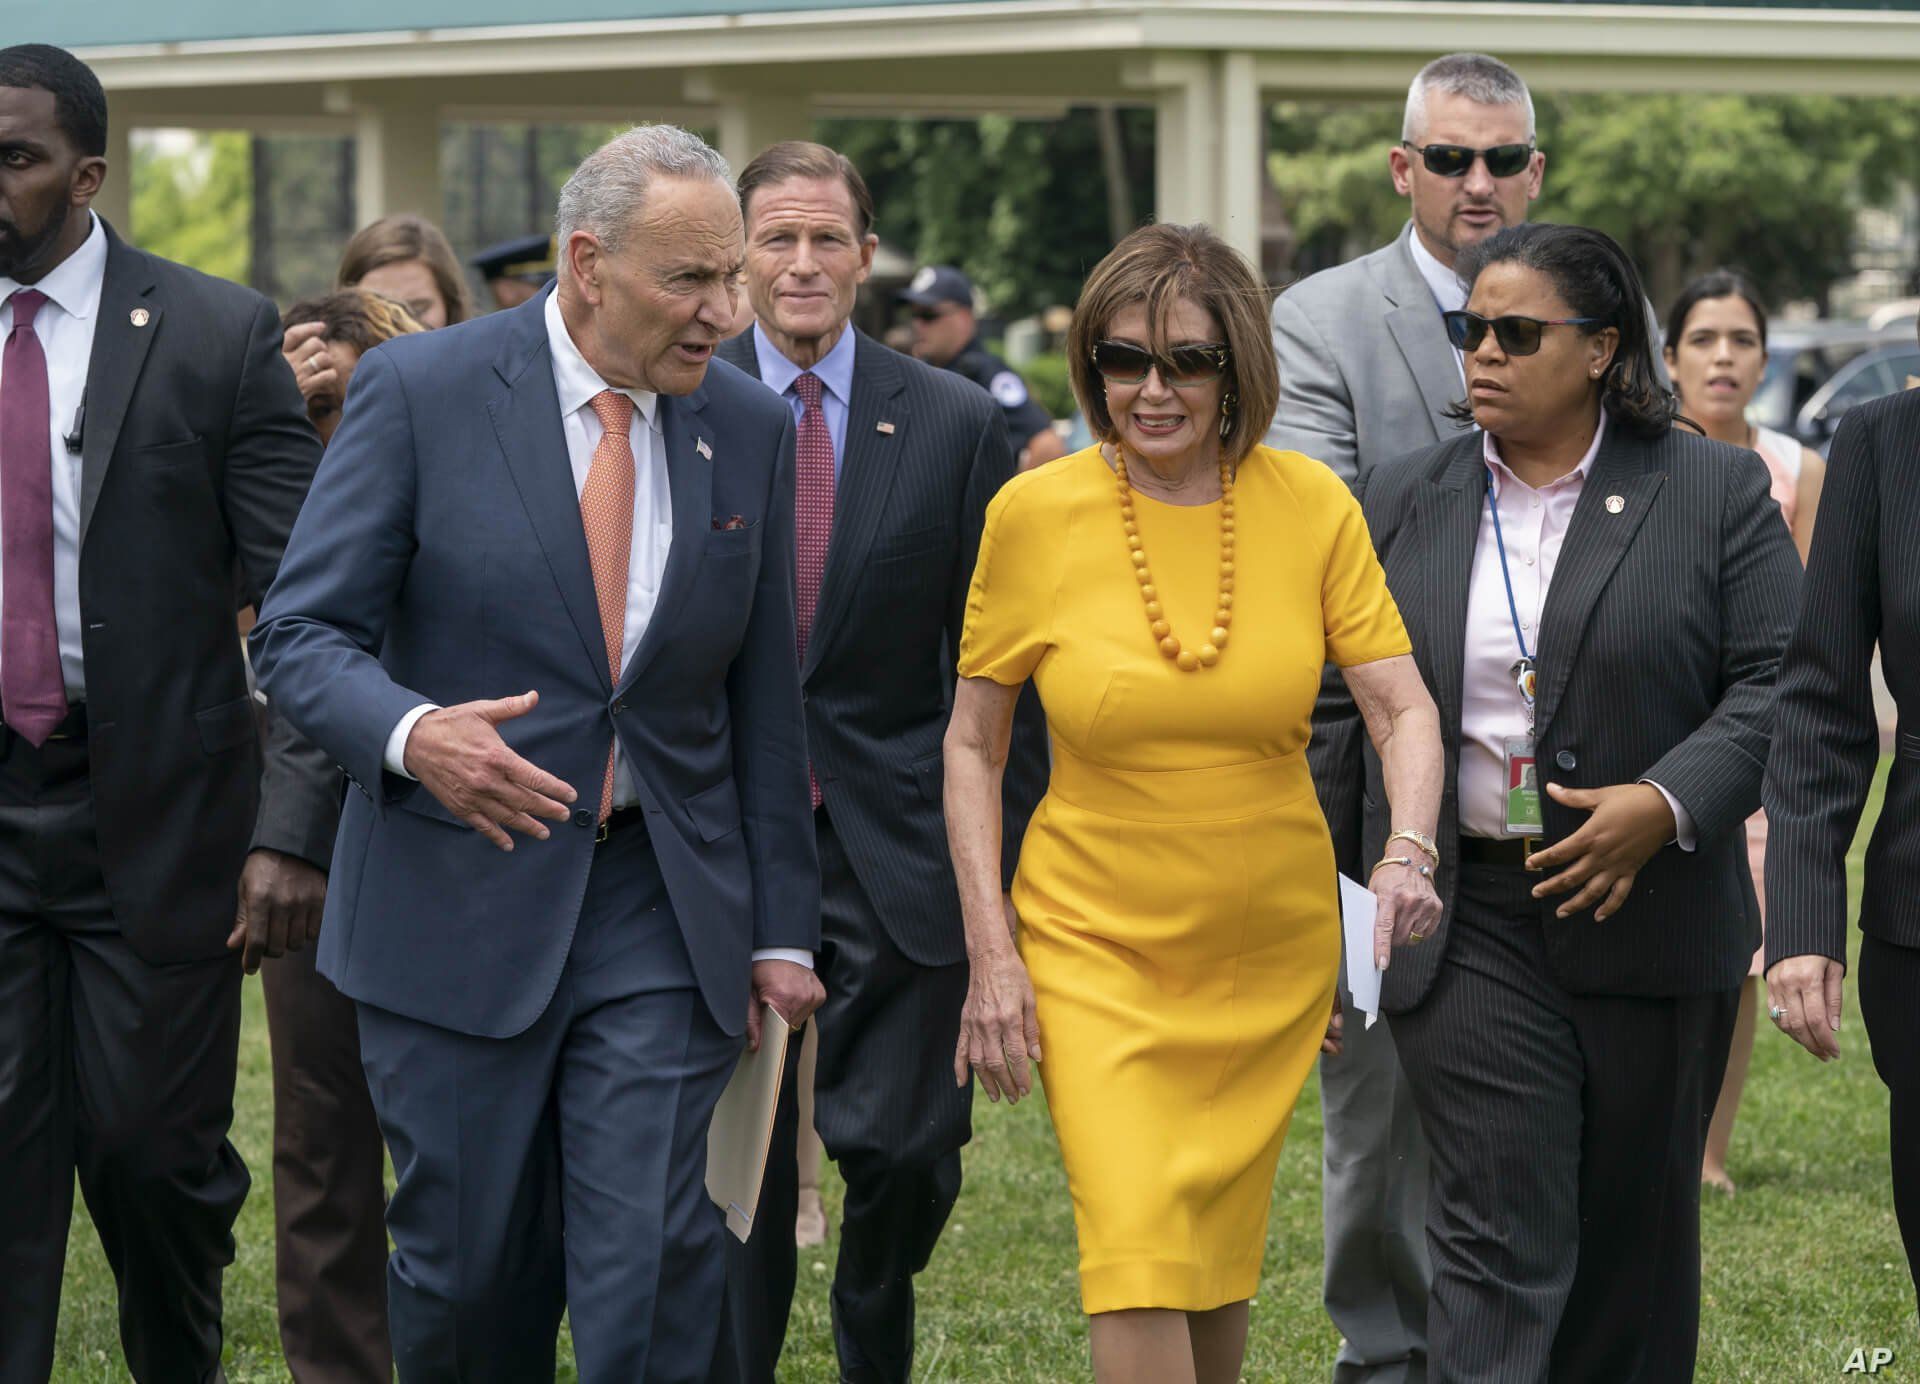 FILE - Senate Minority Leader Chuck Schumer, D-N.Y., left, and Speaker of the House Nancy Pelosi, D-Calif., walk together at the Capitol in Washington, June 20, 2019.